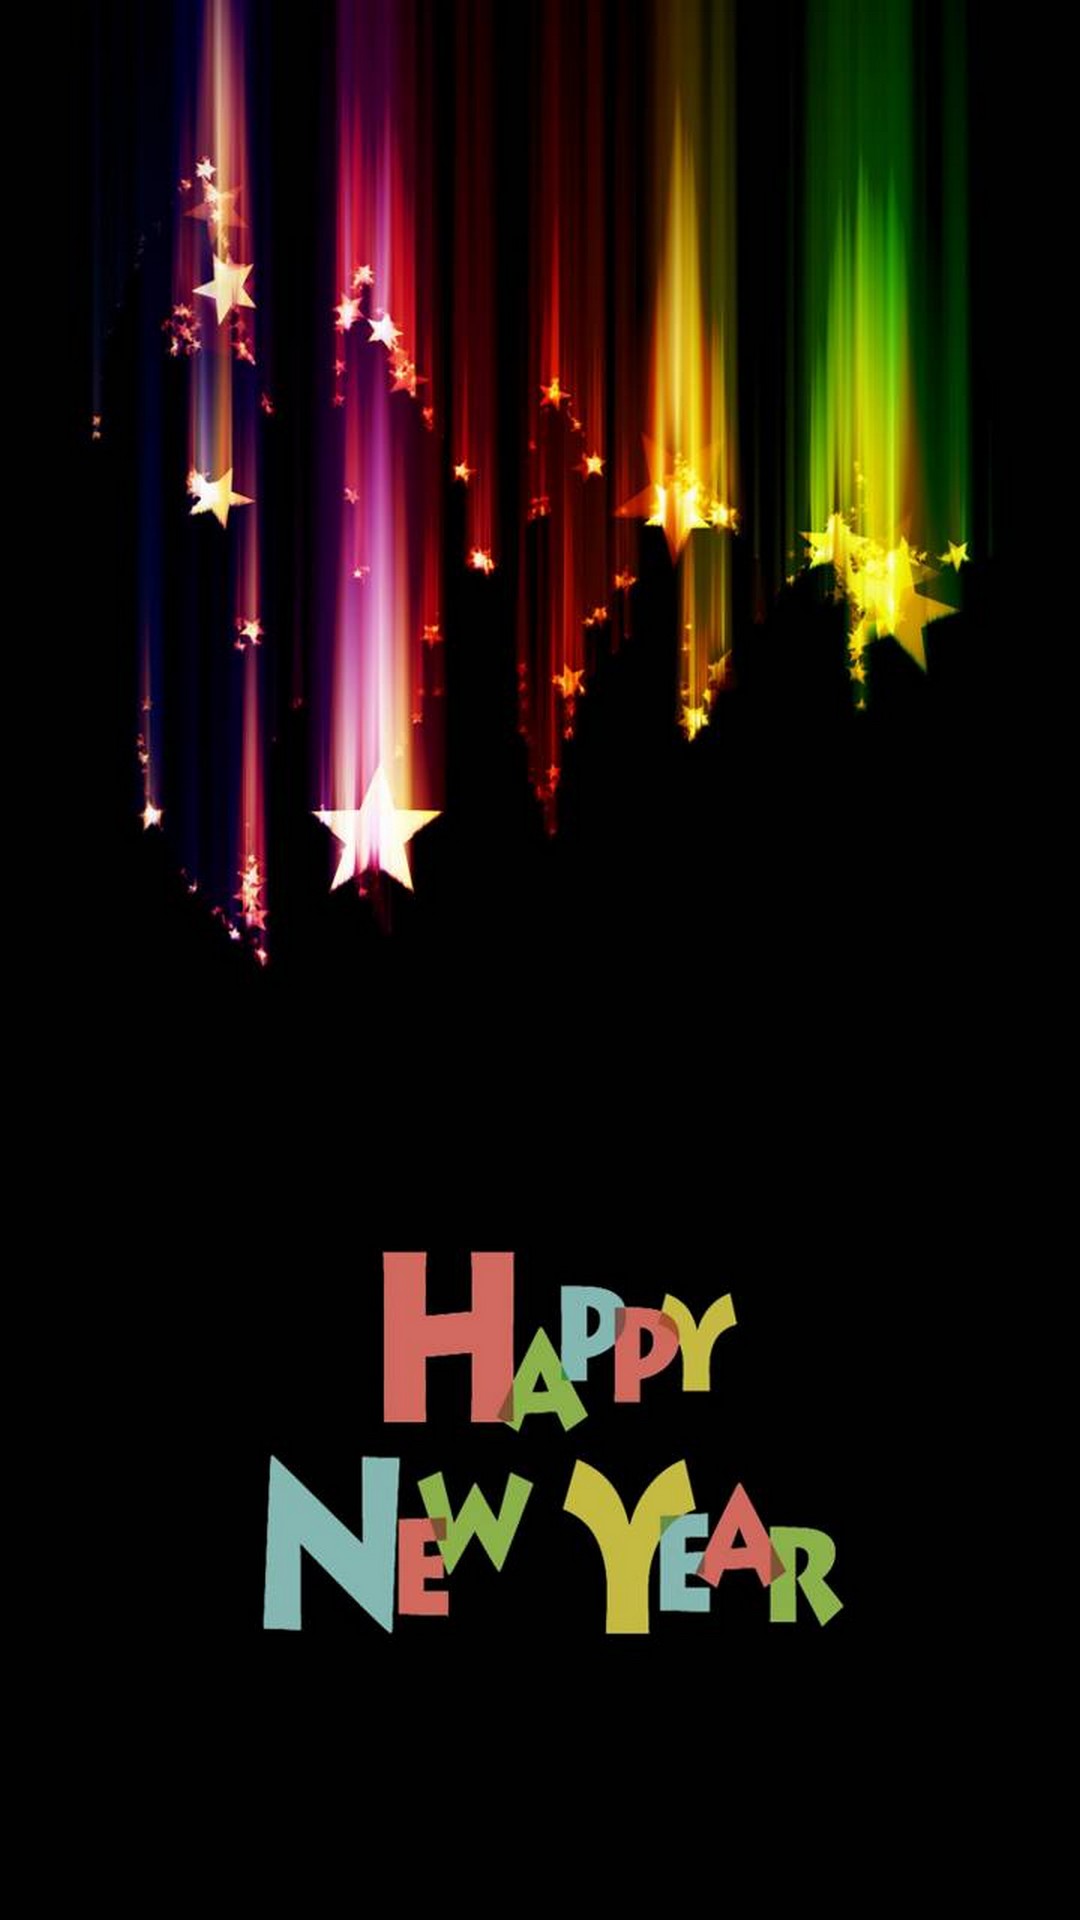 Happy New Year iPhone Wallpapers With high-resolution 1080X1920 pixel. You can use this wallpaper for your iPhone 5, 6, 7, 8, X, XS, XR backgrounds, Mobile Screensaver, or iPad Lock Screen